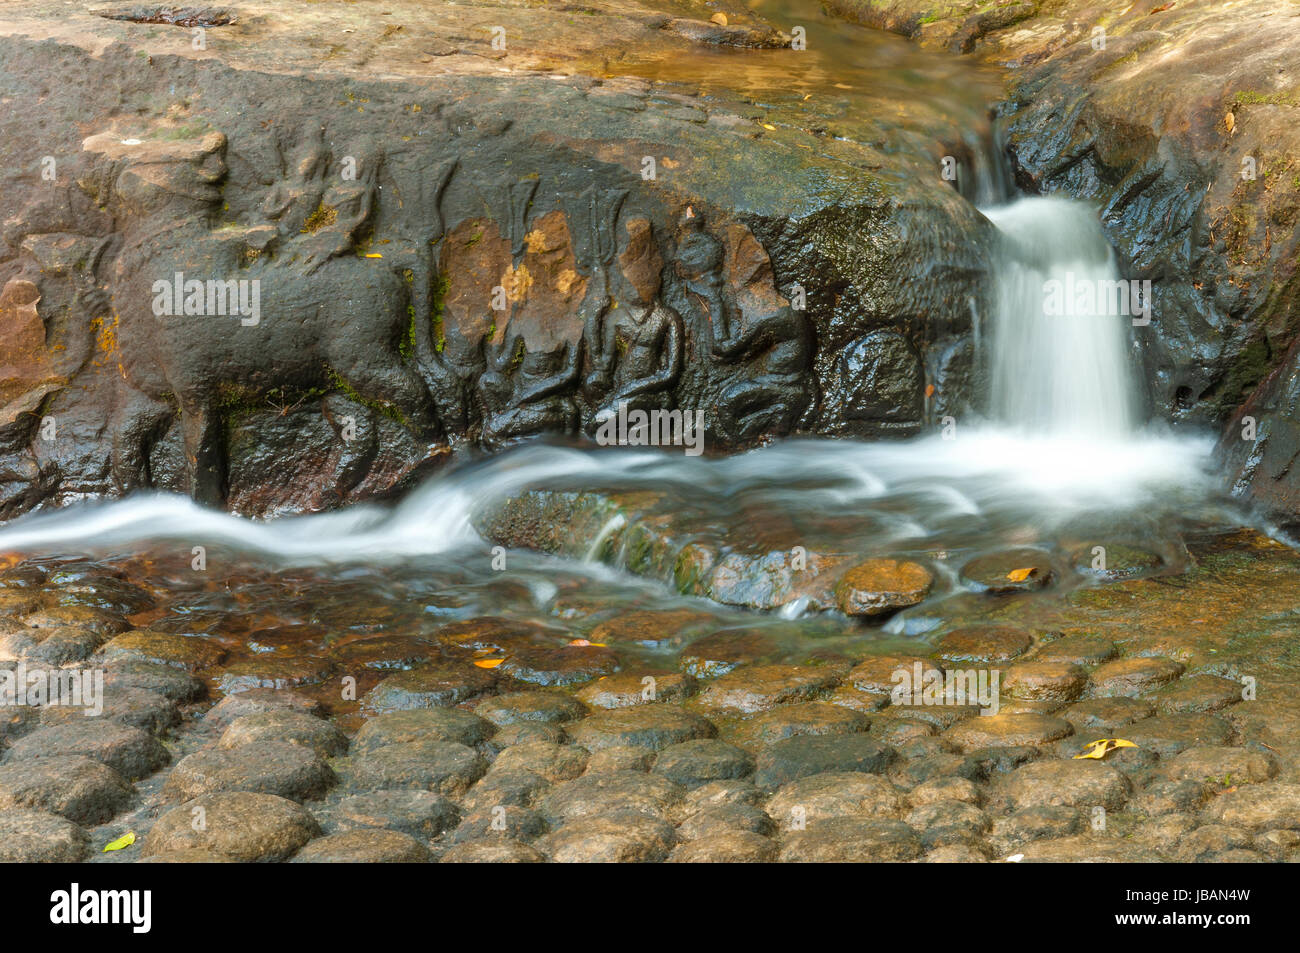 Long exposure of Kbal Spean in the jungle of Angkor, the River of a Thousand Lingas, a natural rock bridge with phallic symbols, Siem Reap, Cambodia. Stock Photo